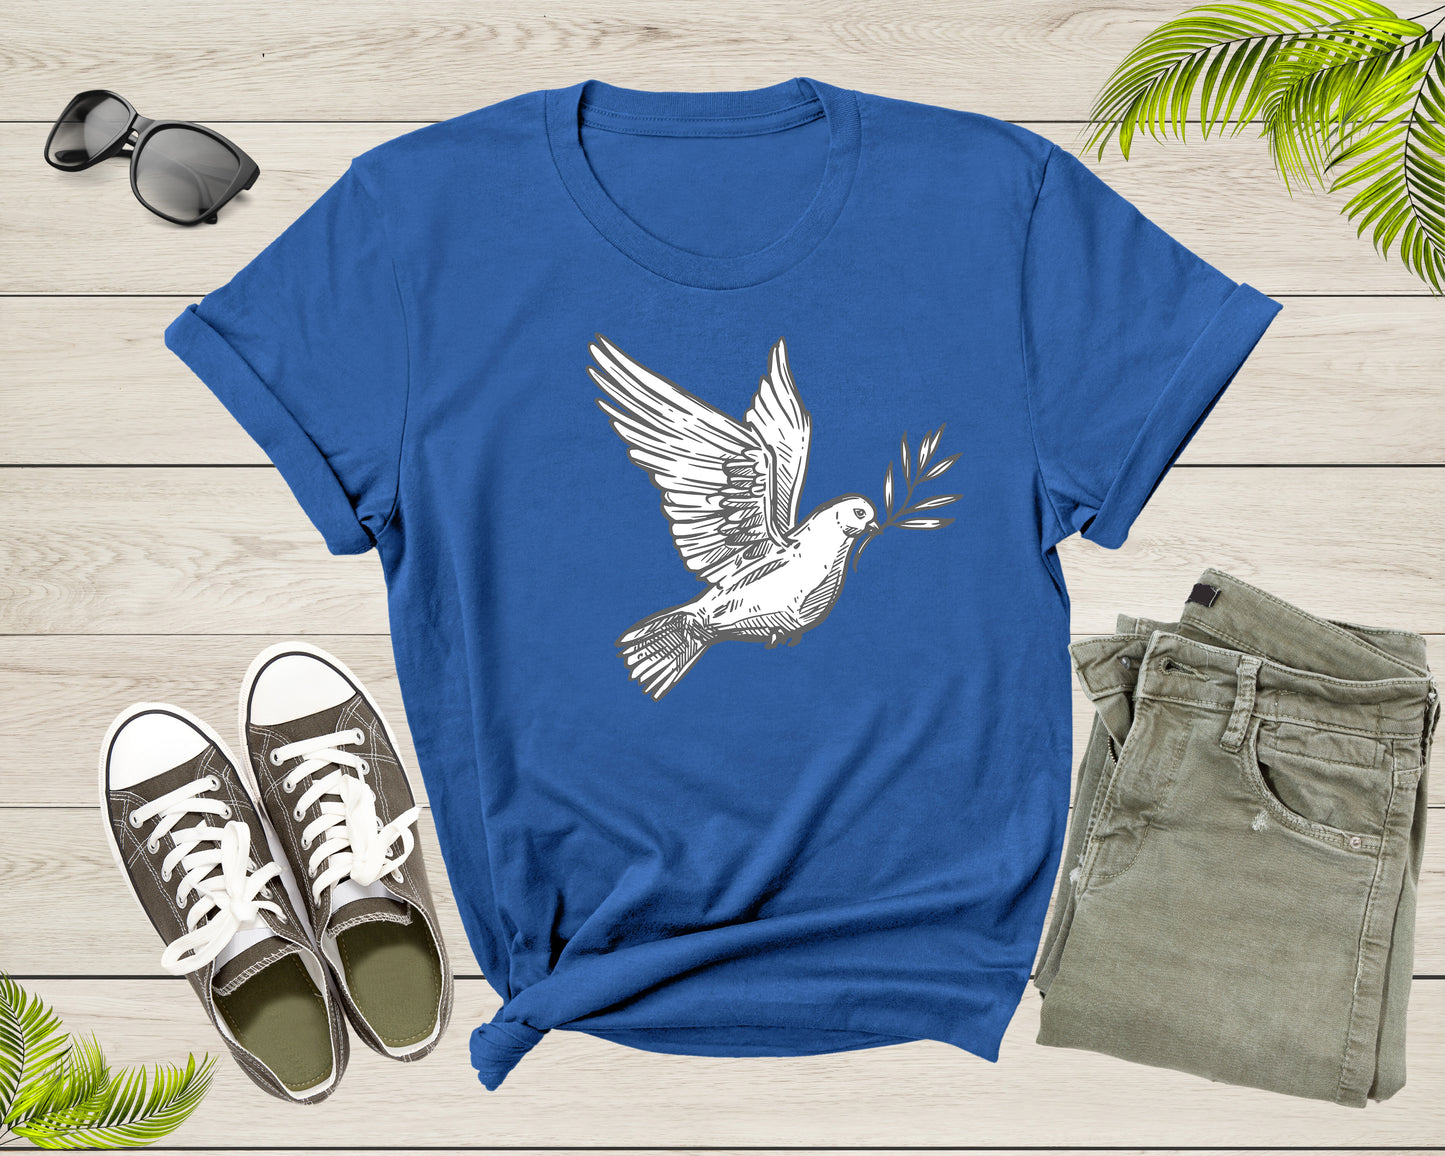 Flying White Dove Pigeon Bird with Olive Branch Peace Symbol T-Shirt Dove Lover Gift T Shirt for Men Women Kids Boys Girls Graphic Tshirt